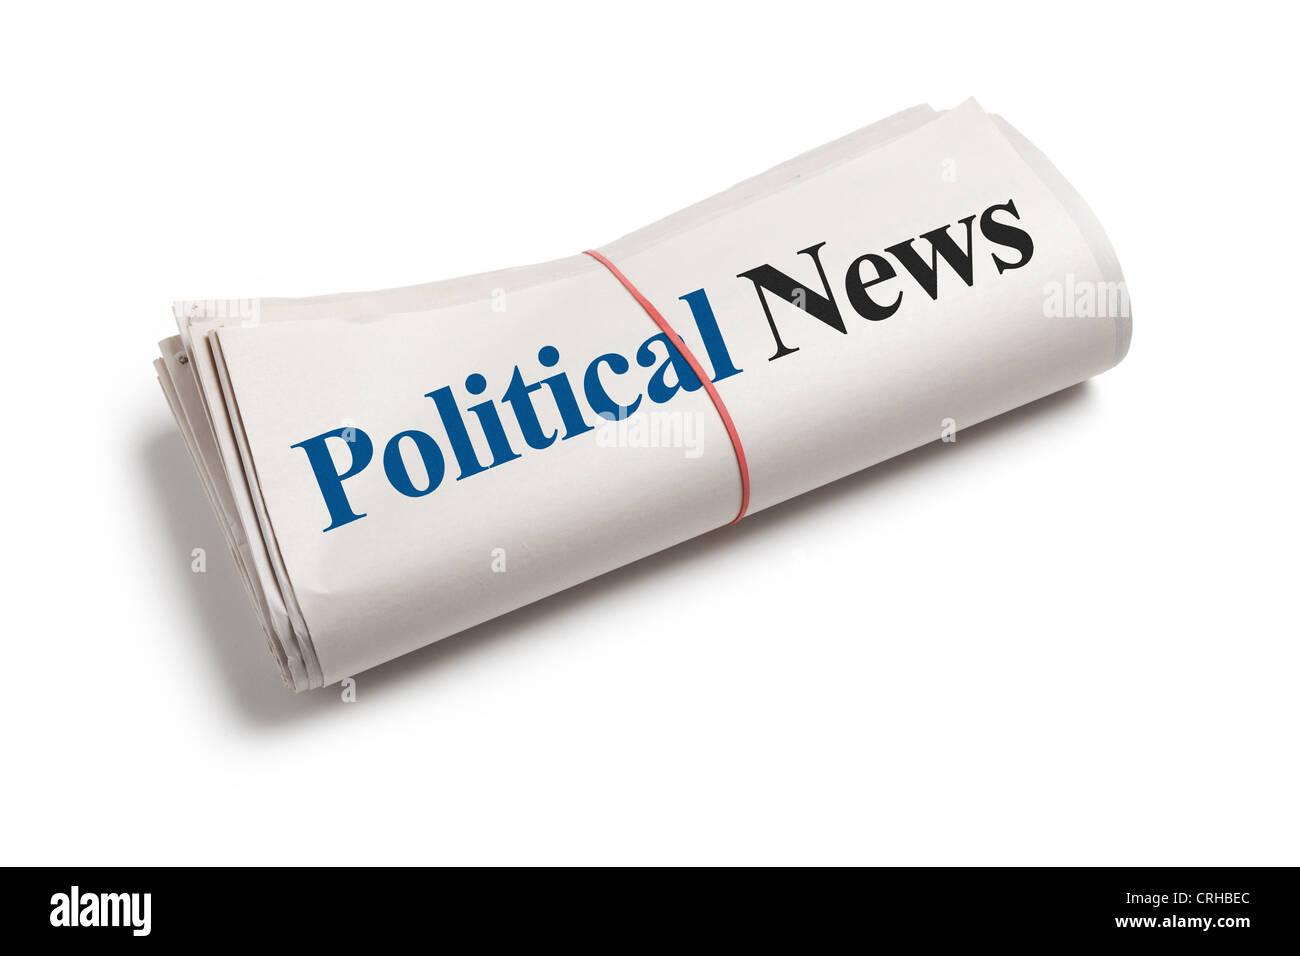 Political News, Newspaper Roll with white background Stock Photo